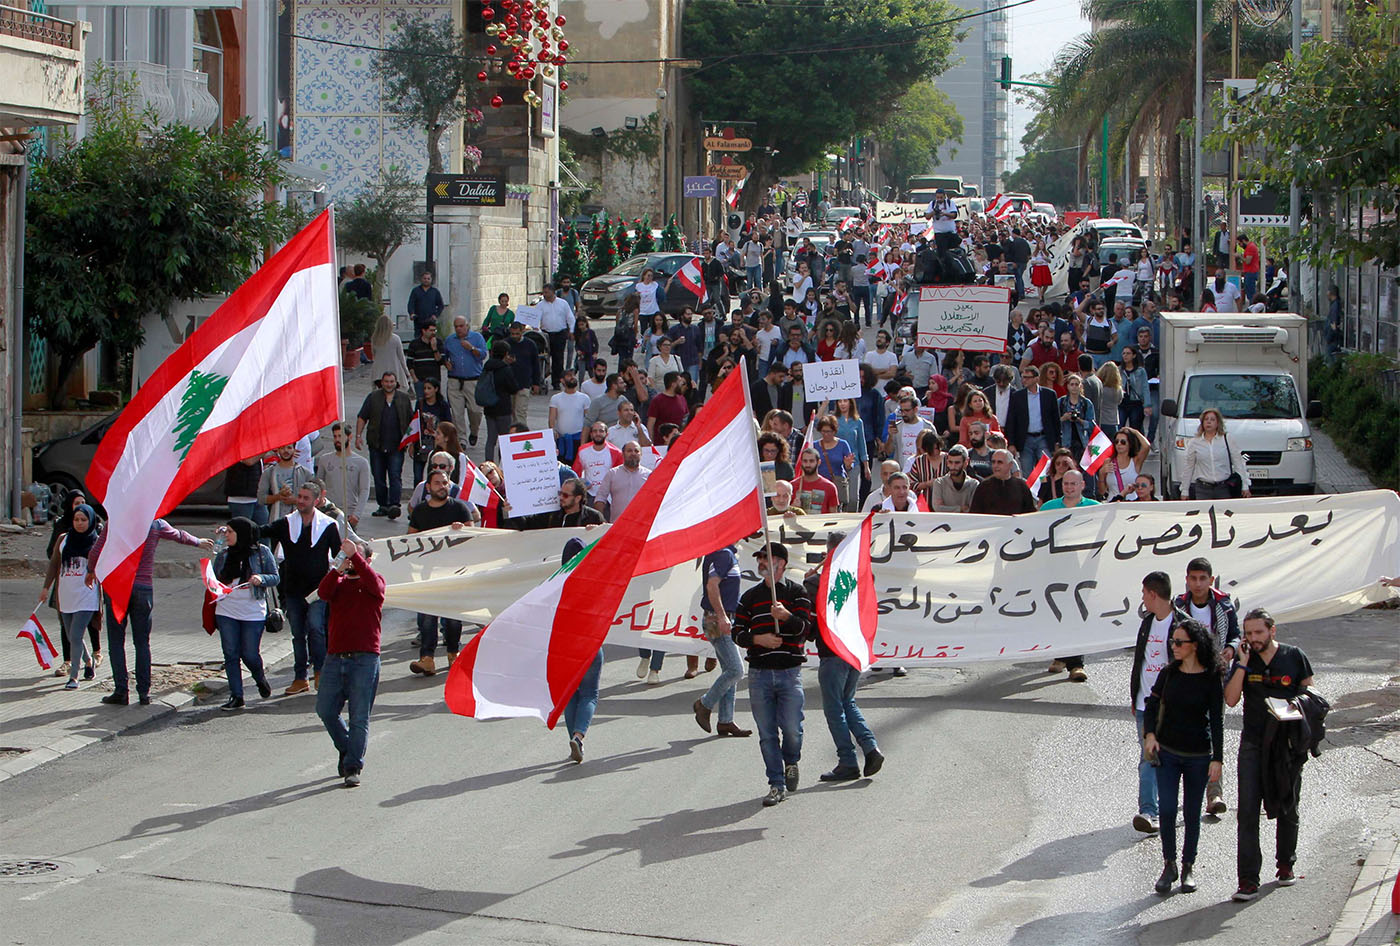 Protesters hold banners and Lebanese flags in Beirut